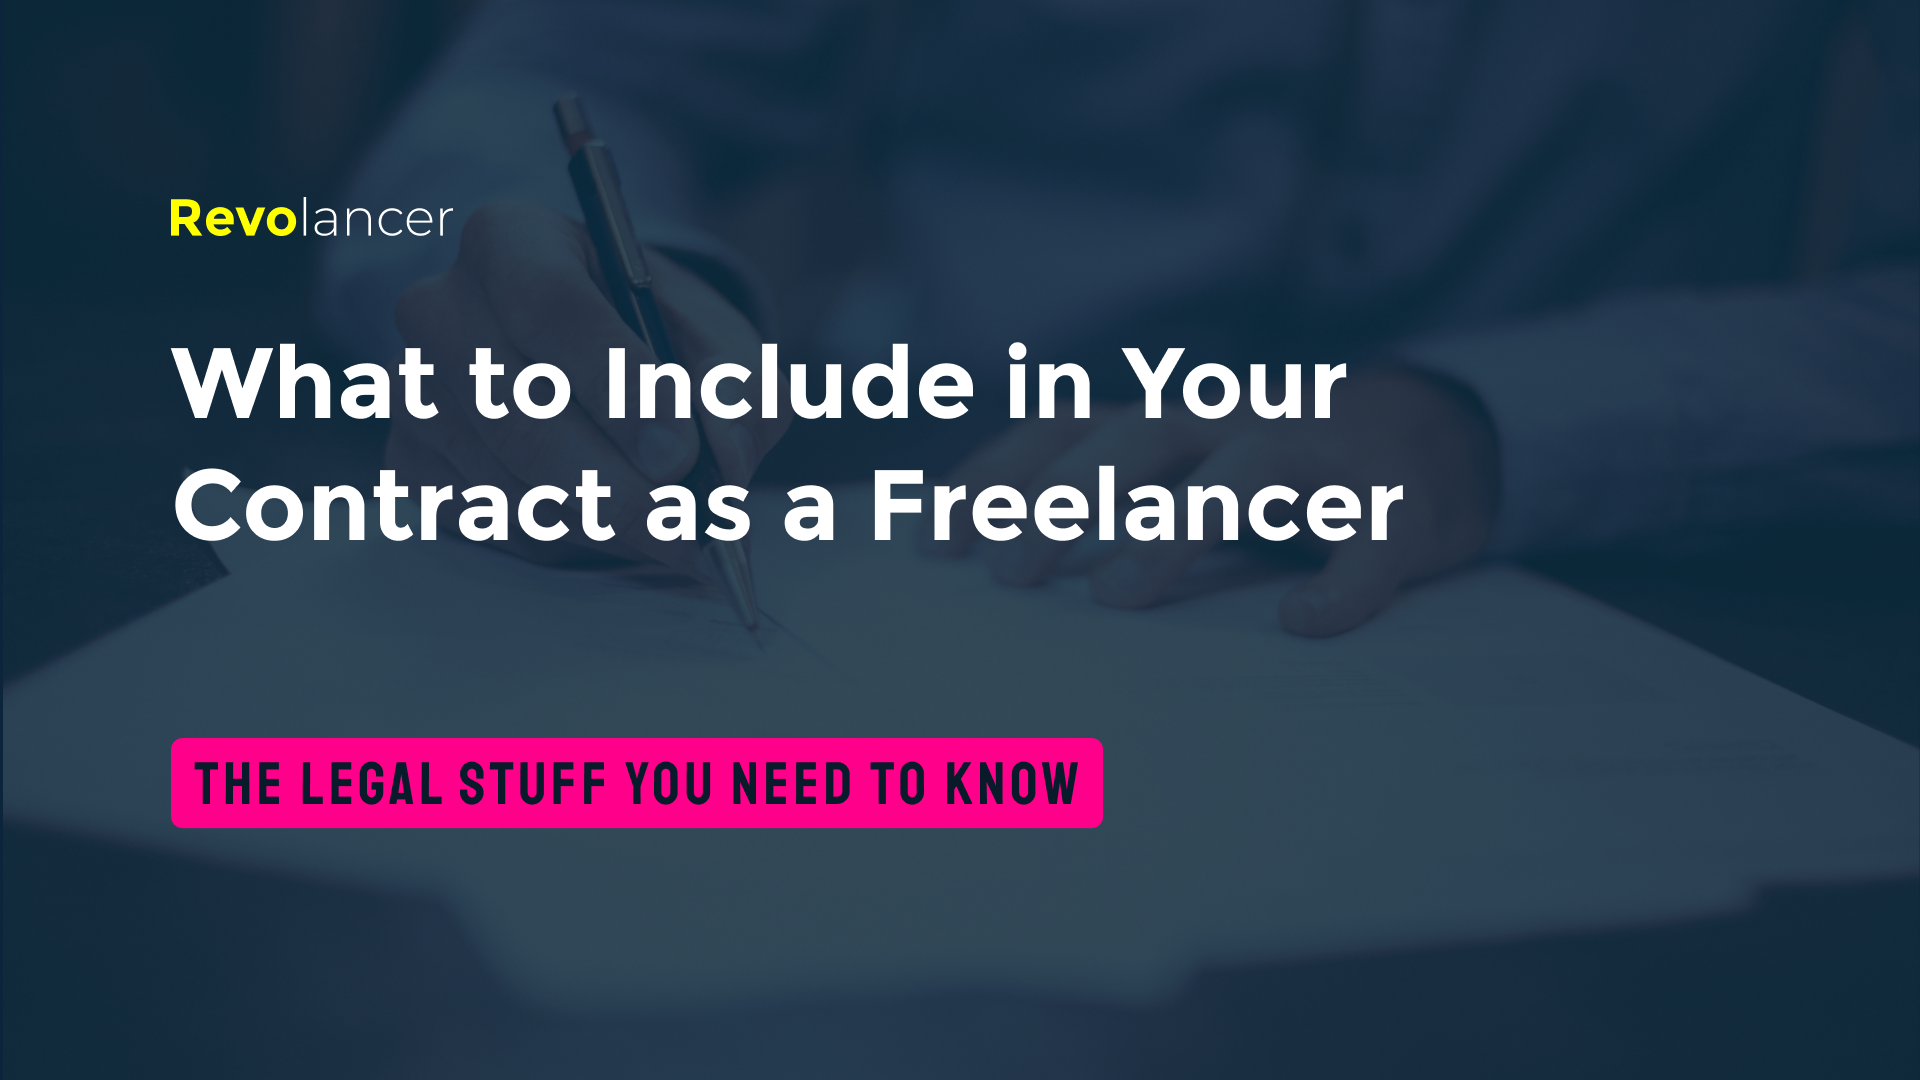 What to Include in Your Contract as a Freelancer